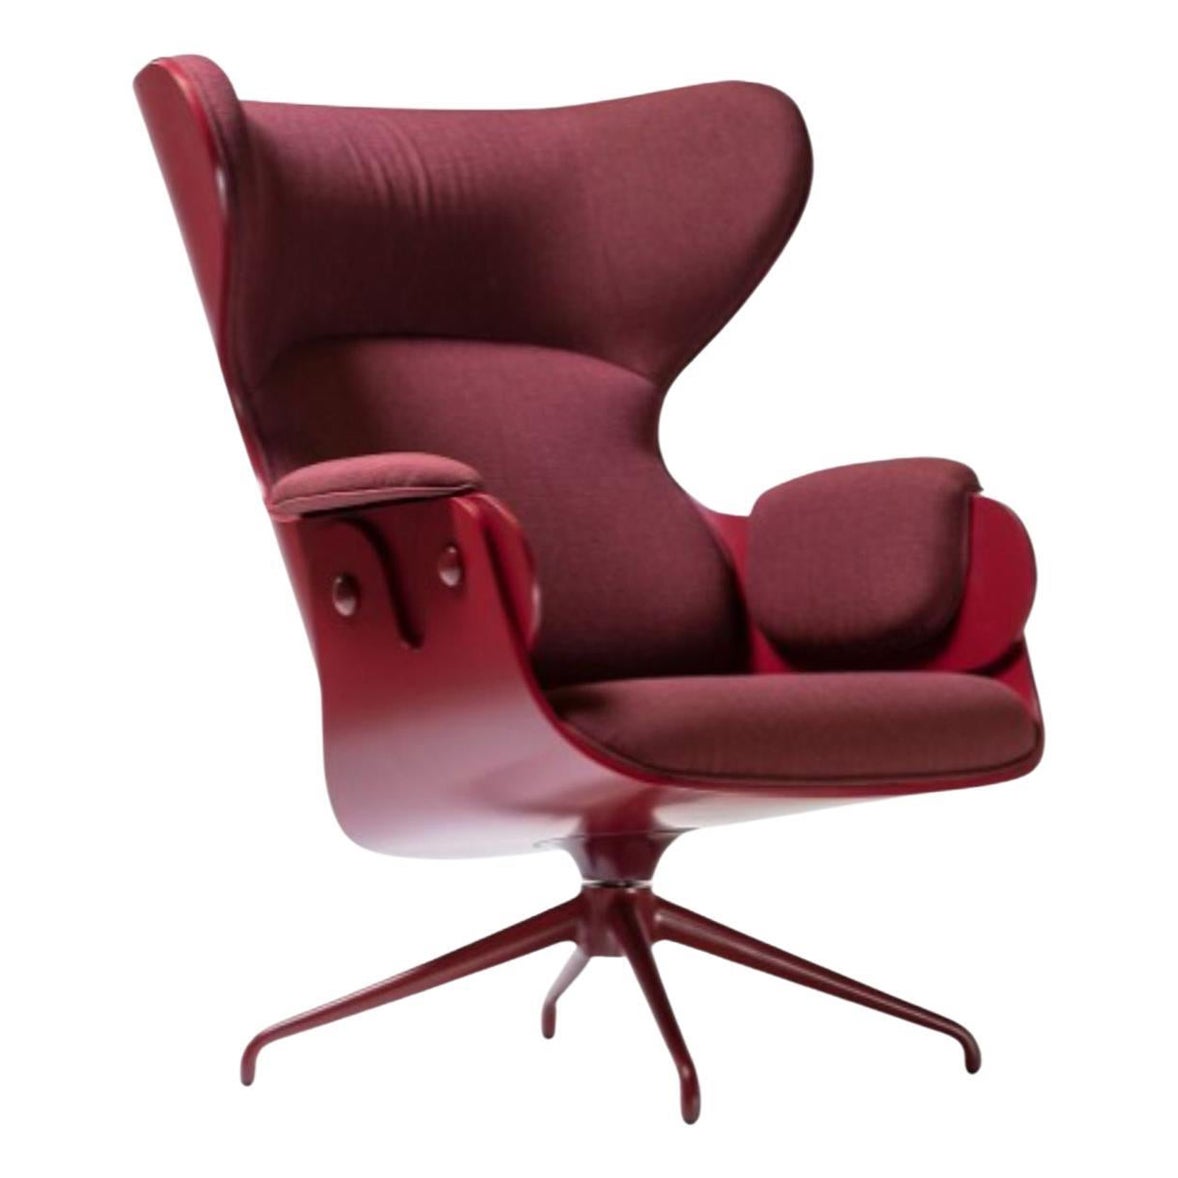 Loungesessel Roter Sessel von Jaime Hayon